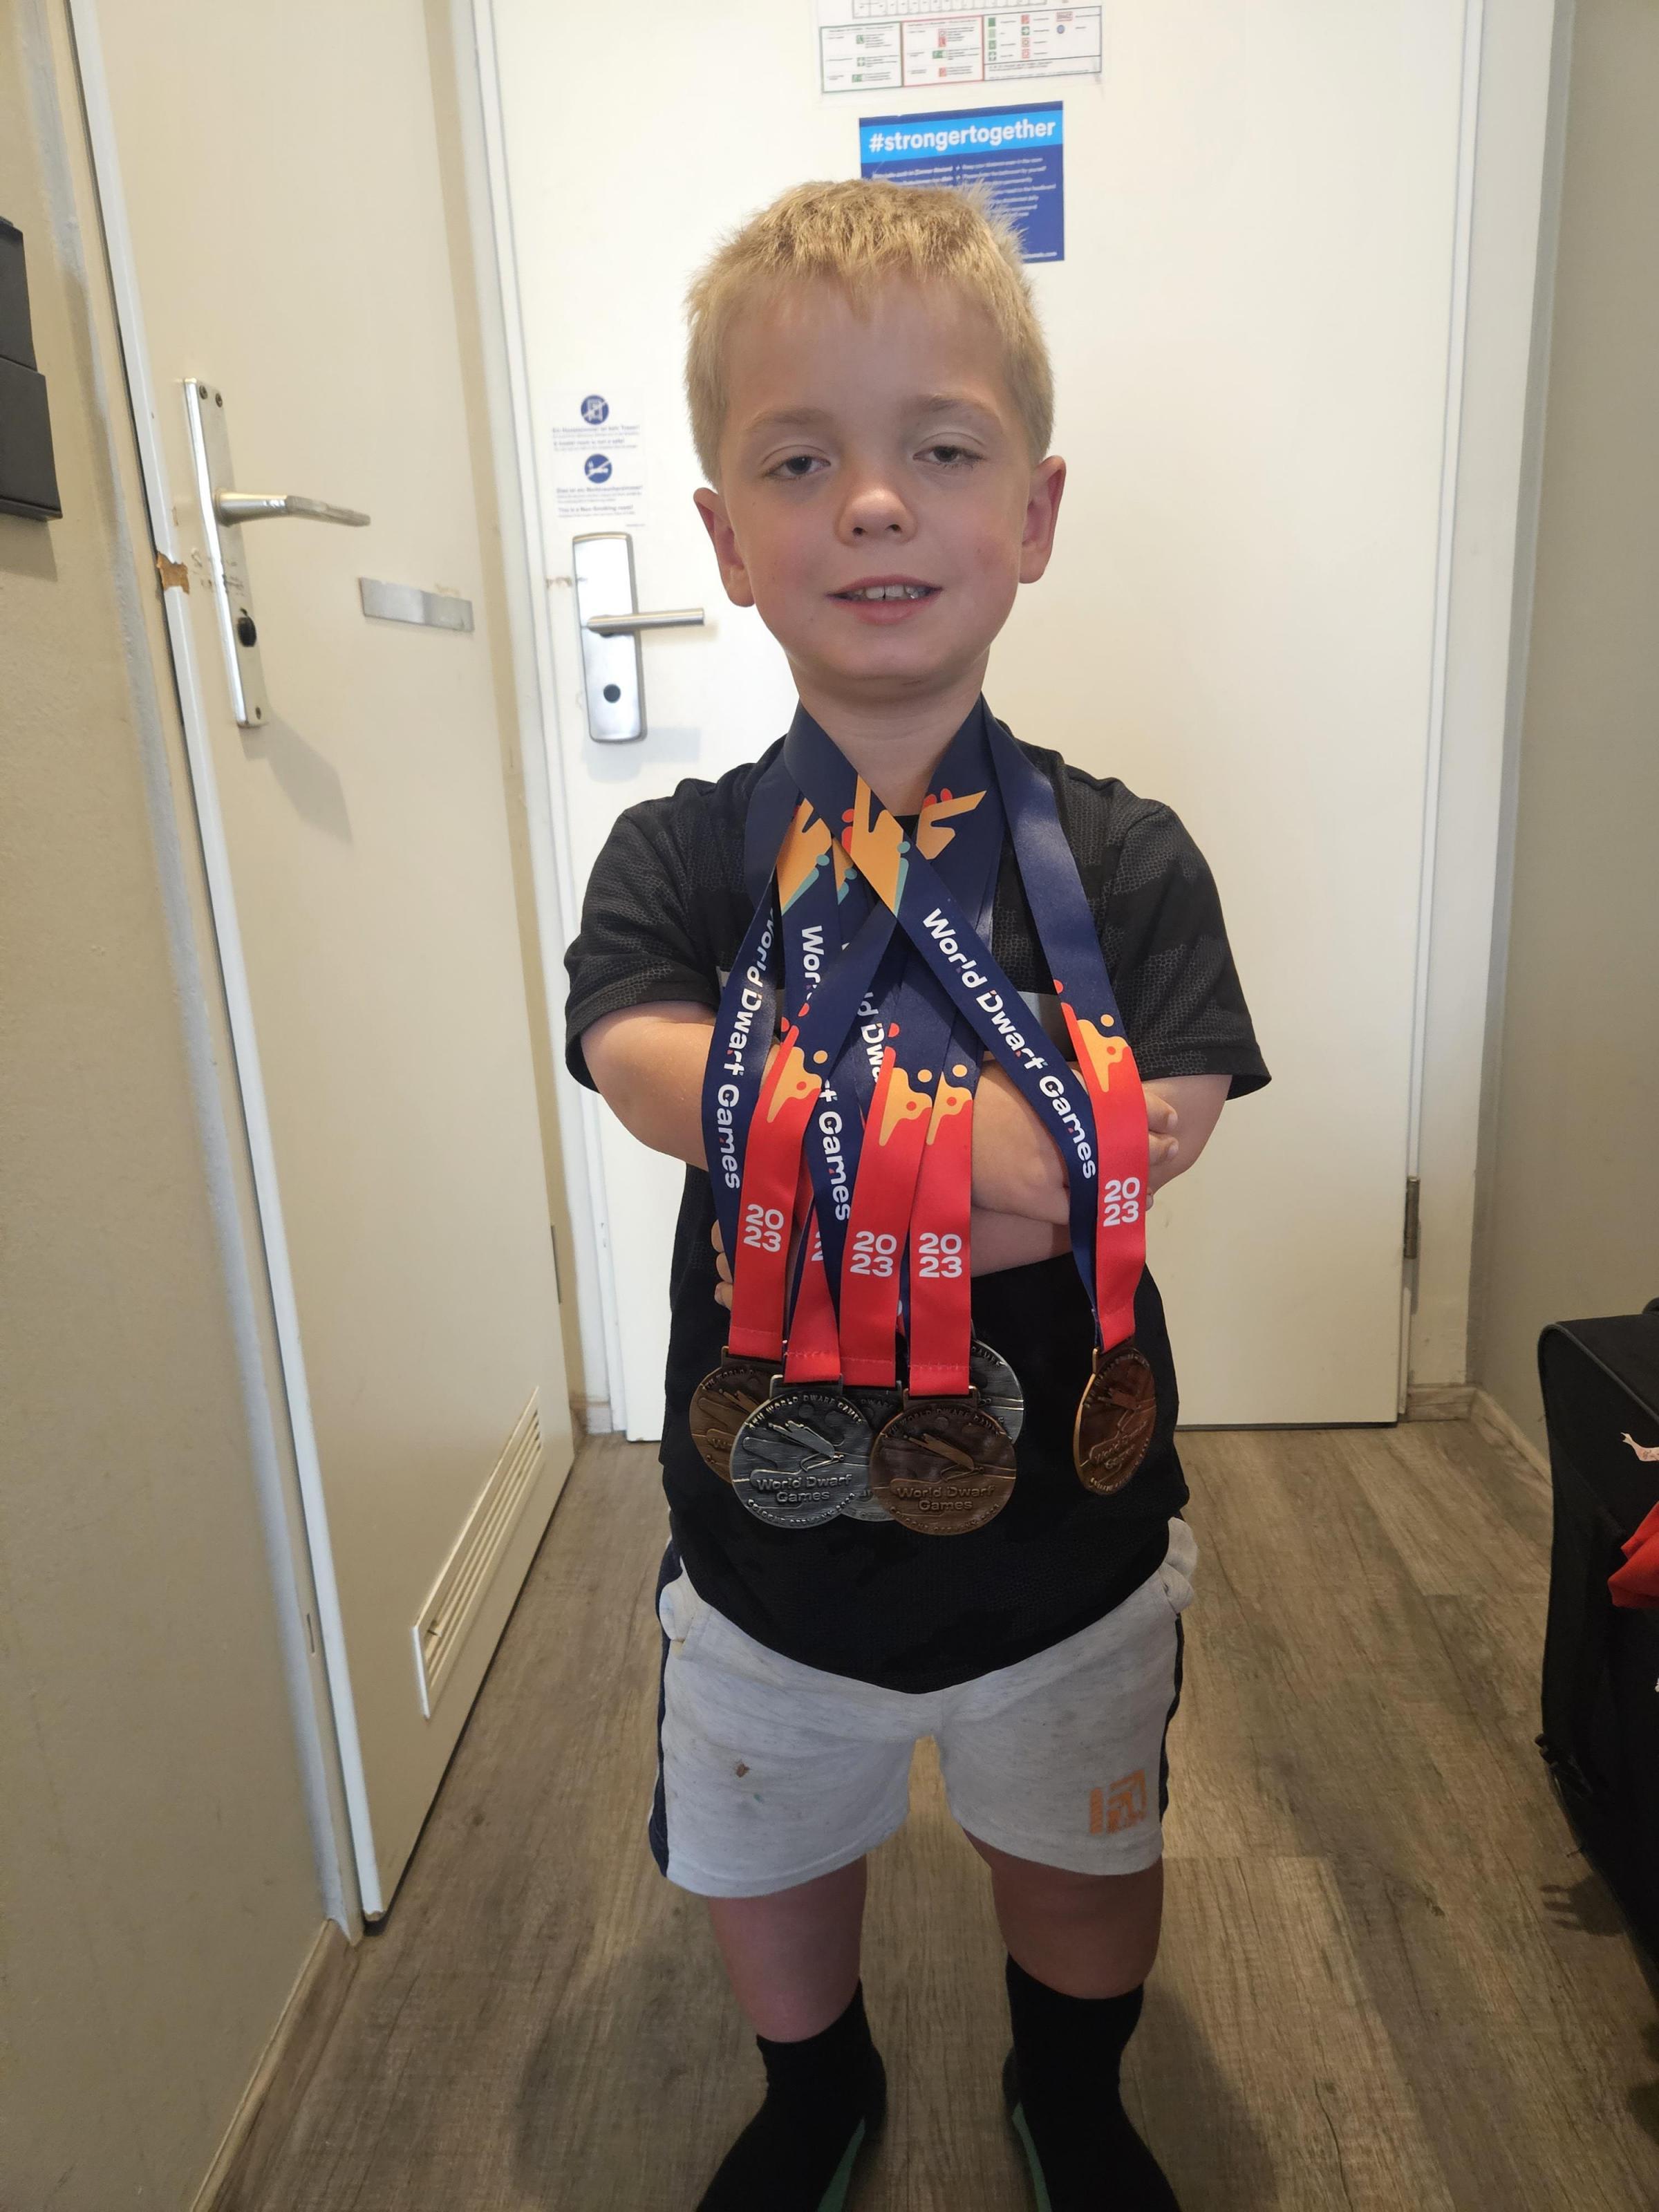 Matthew Green, nine, with his medal haul.